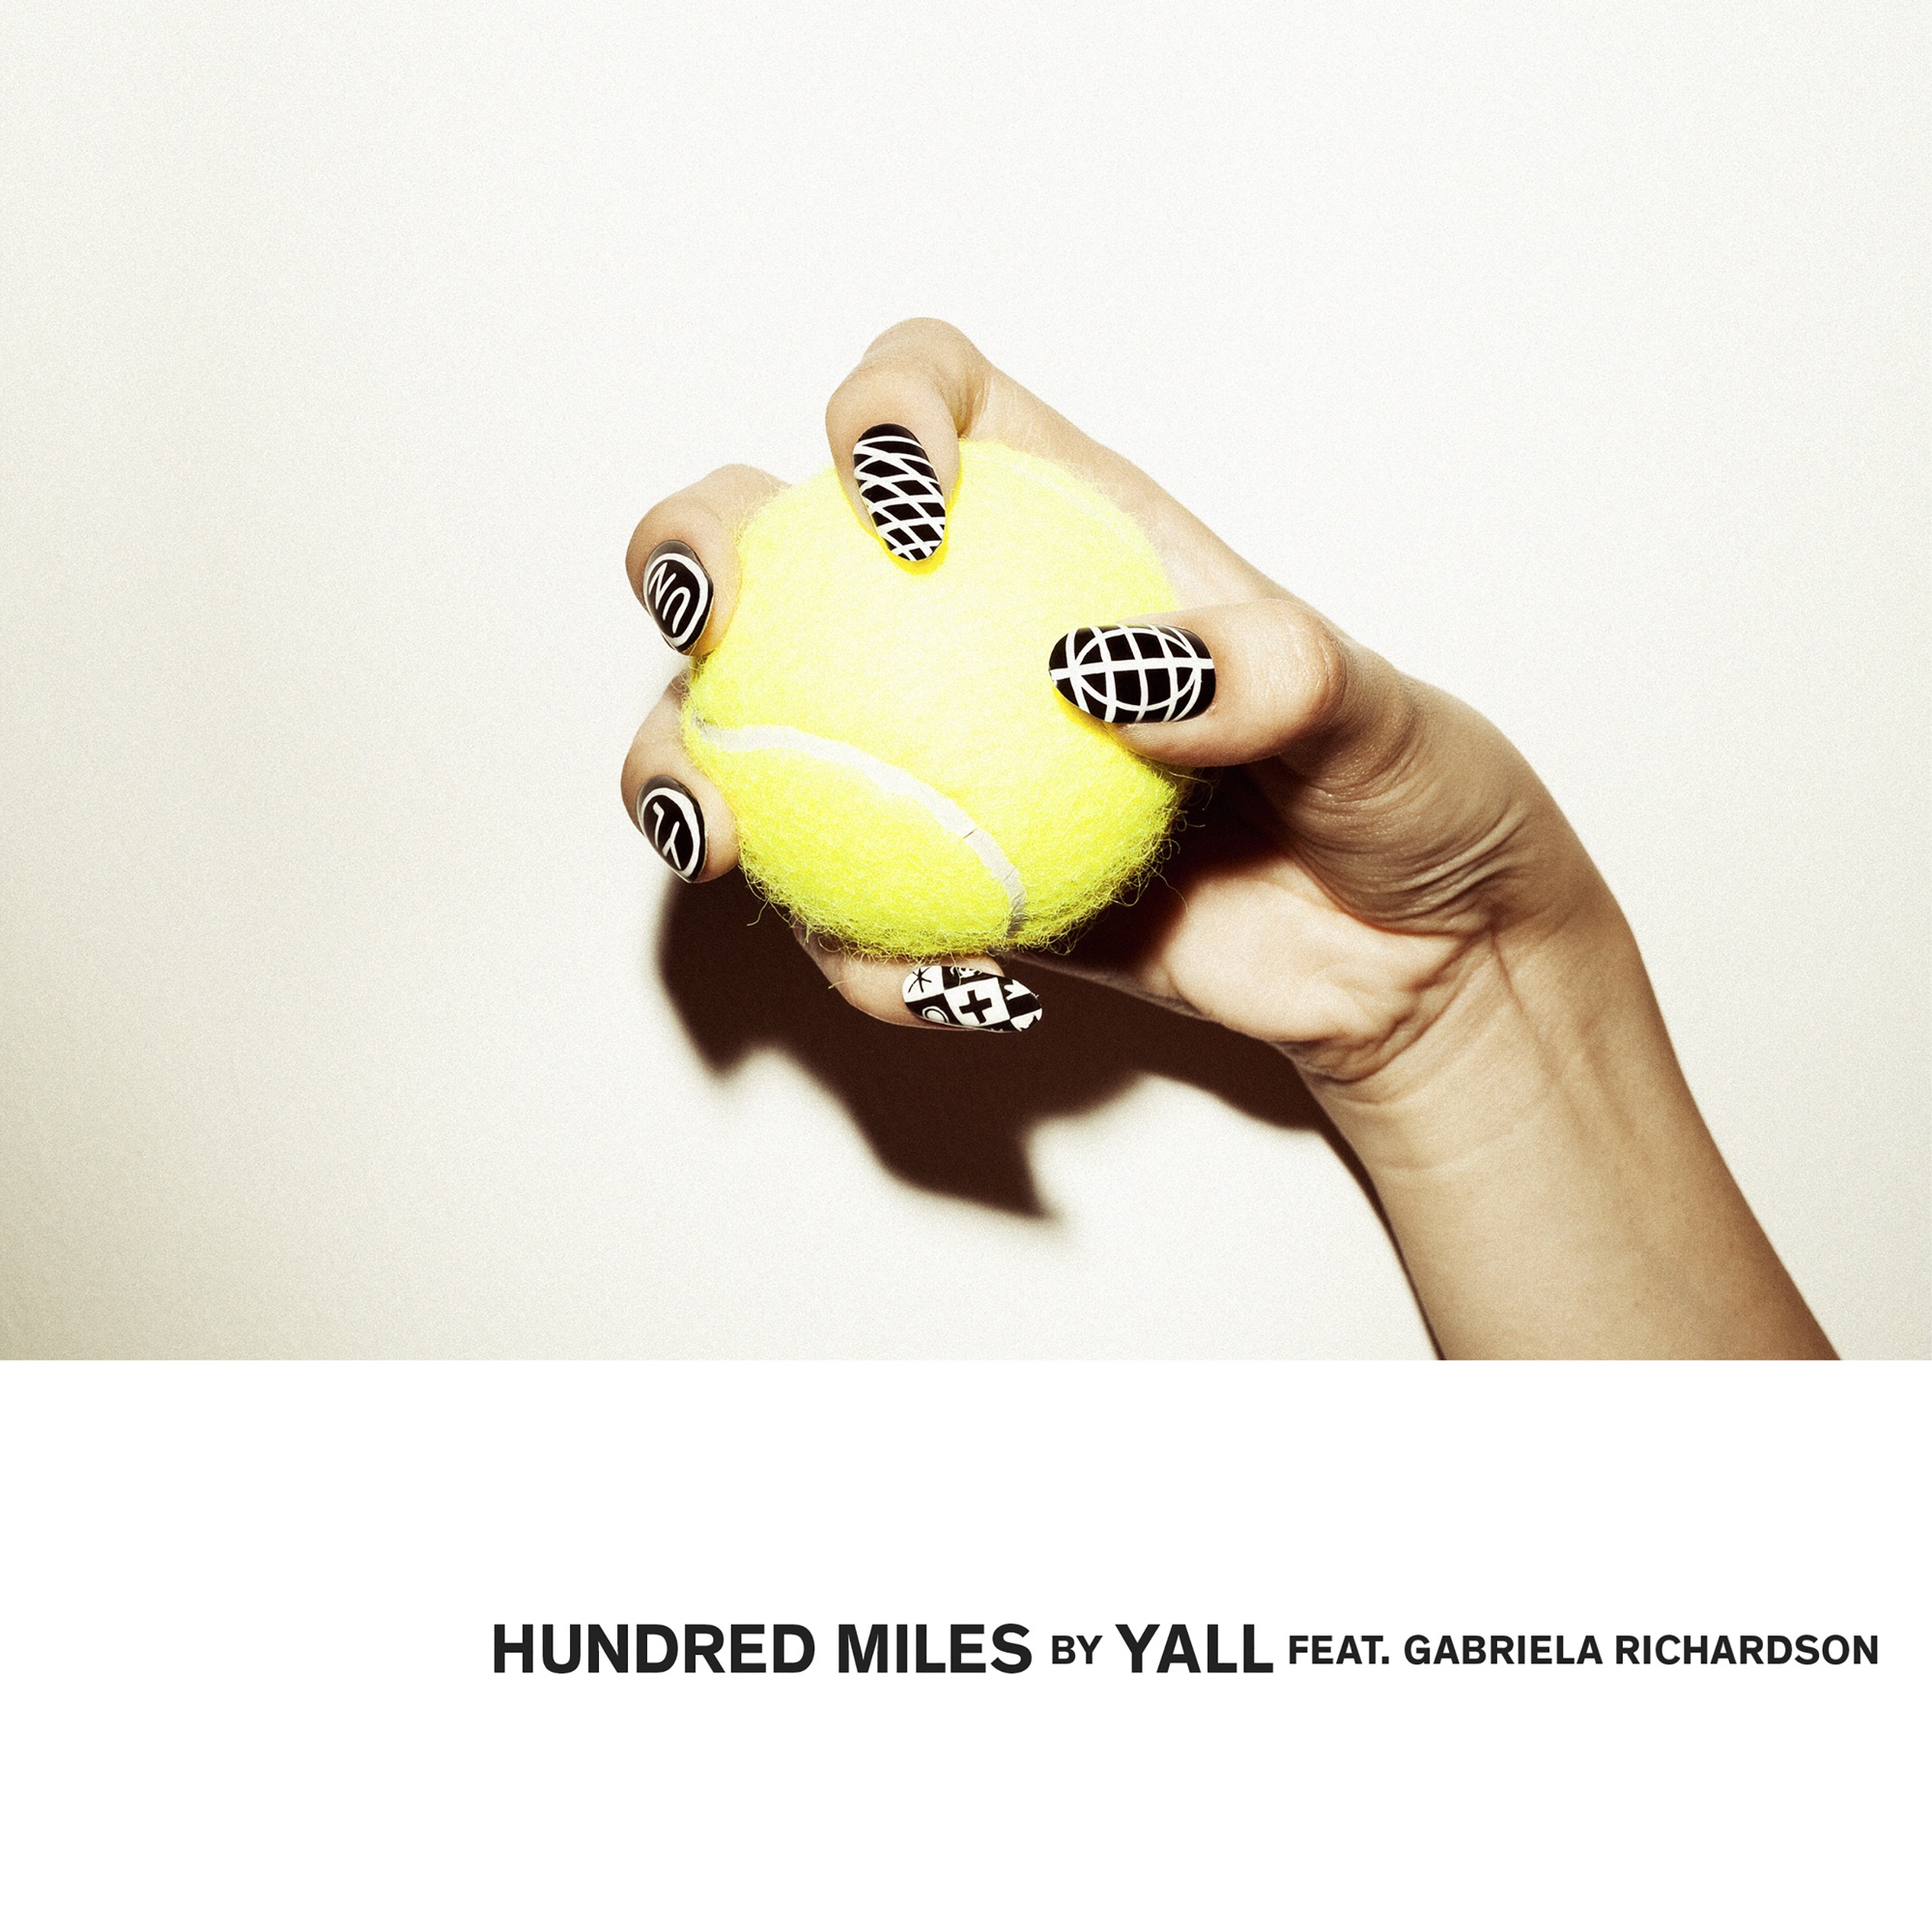 Art for Hundred Miles (feat. Gabriela Richardson) by Yall